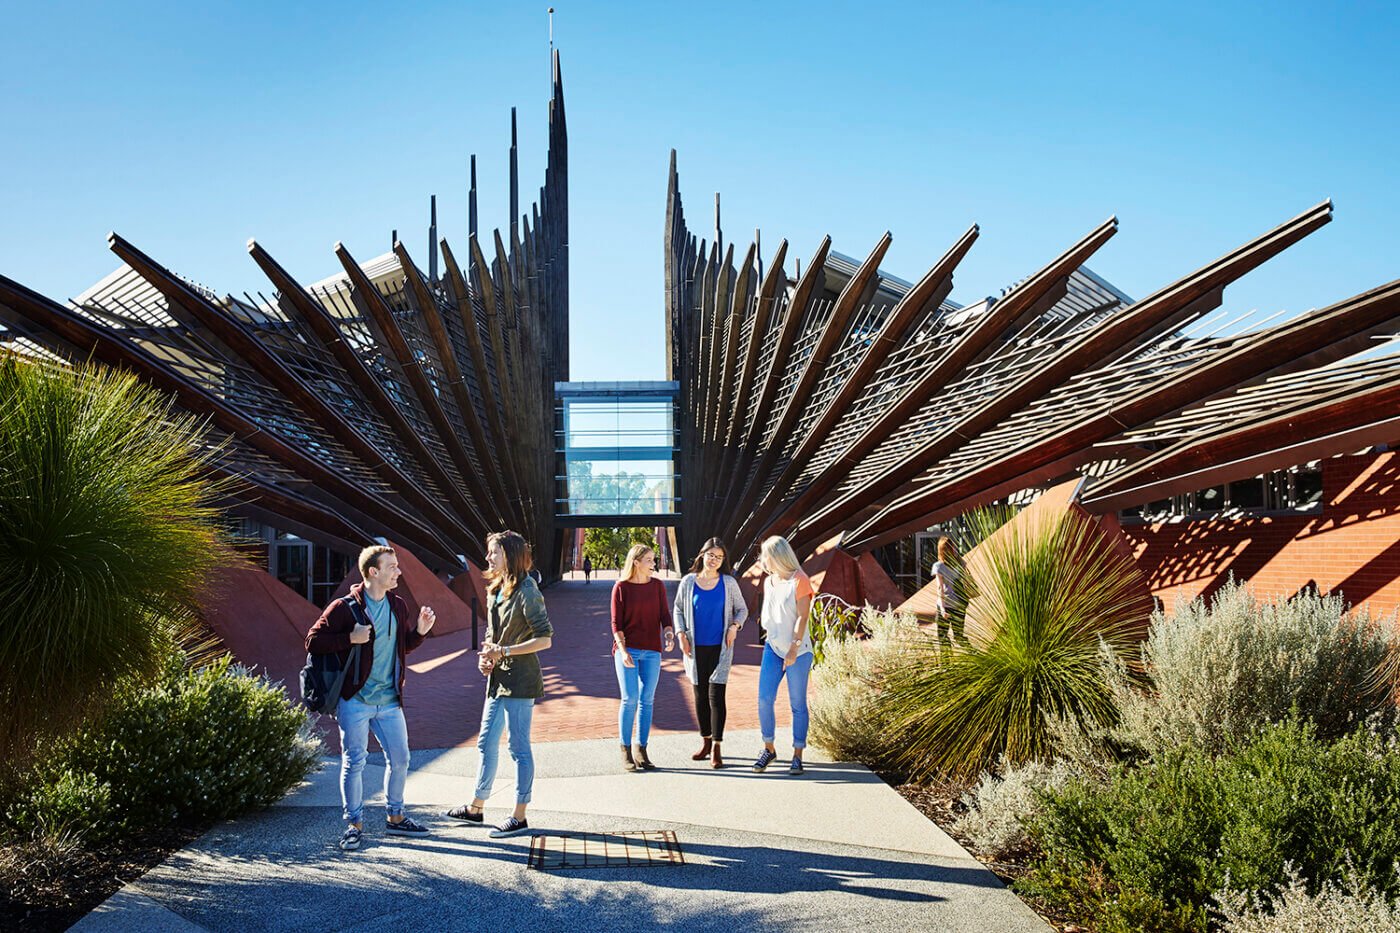 Edith Cowan University Joondalup Campus : Rankings, Courses, Admissions, Cost of Attendance, Scholarships, Placements & Alumni